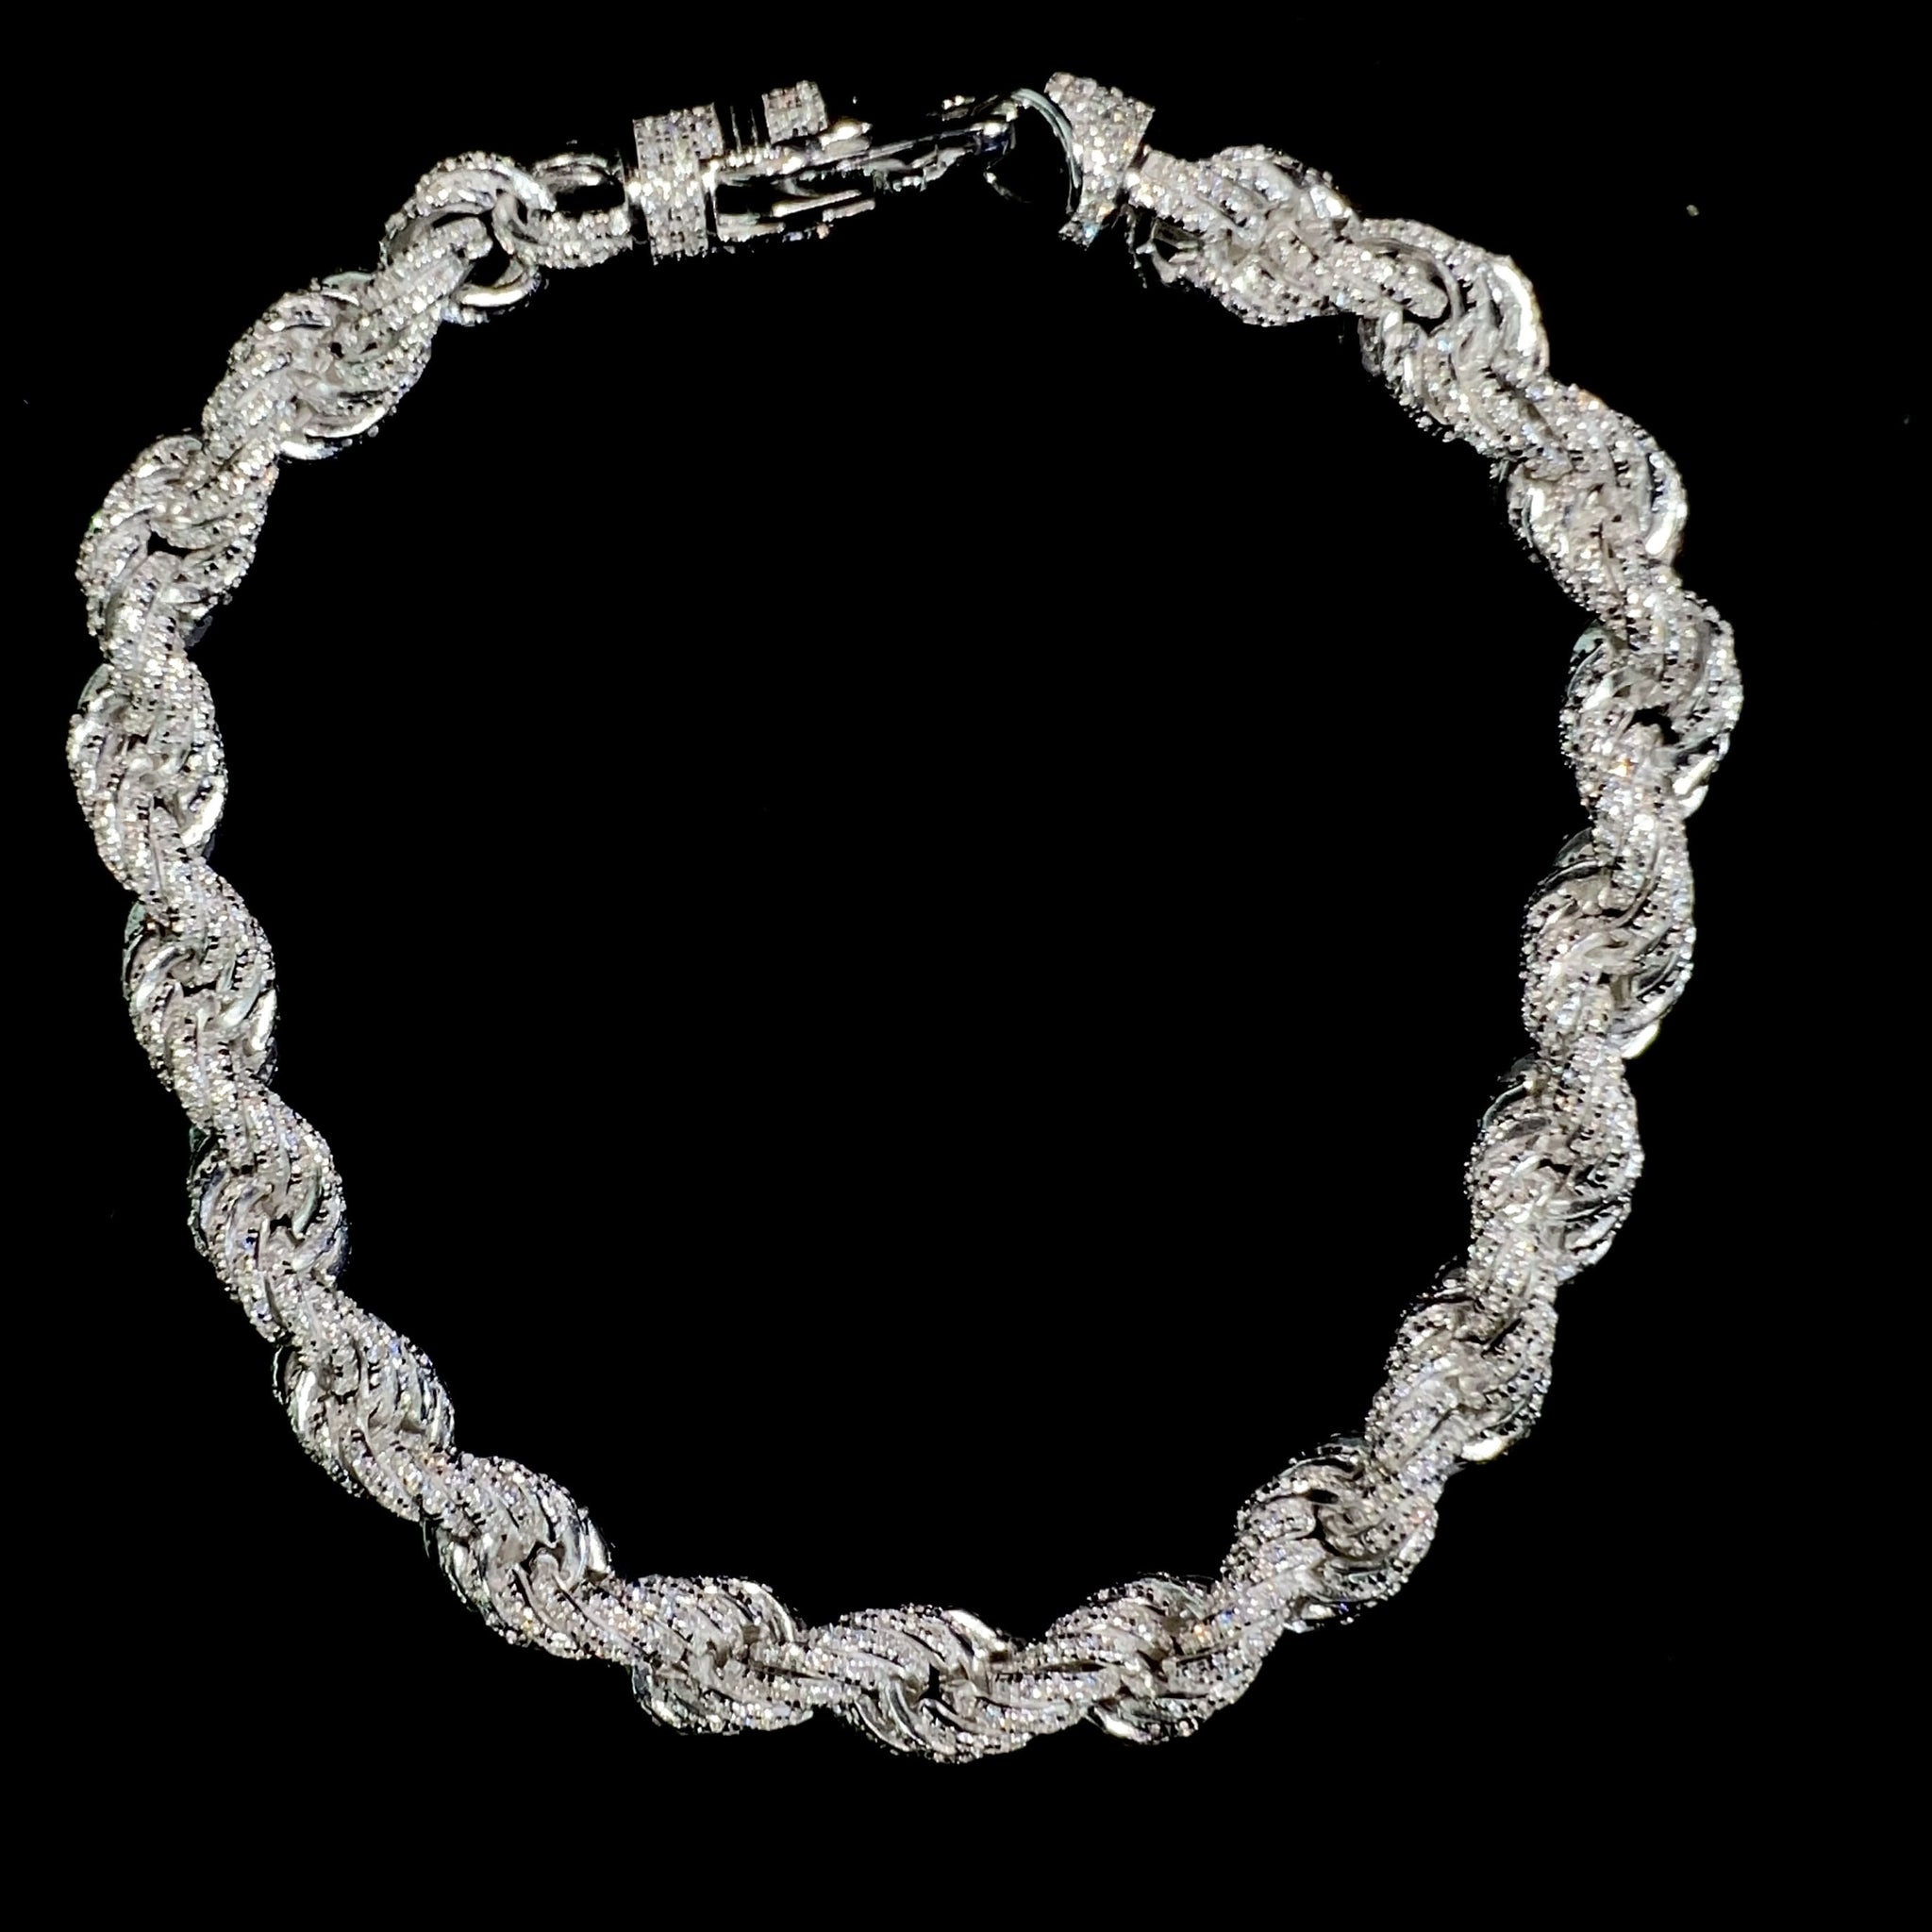 Iced Out Rope Bracelet - 7.5mm - Silver 925 - Sehgal Dubai Collection